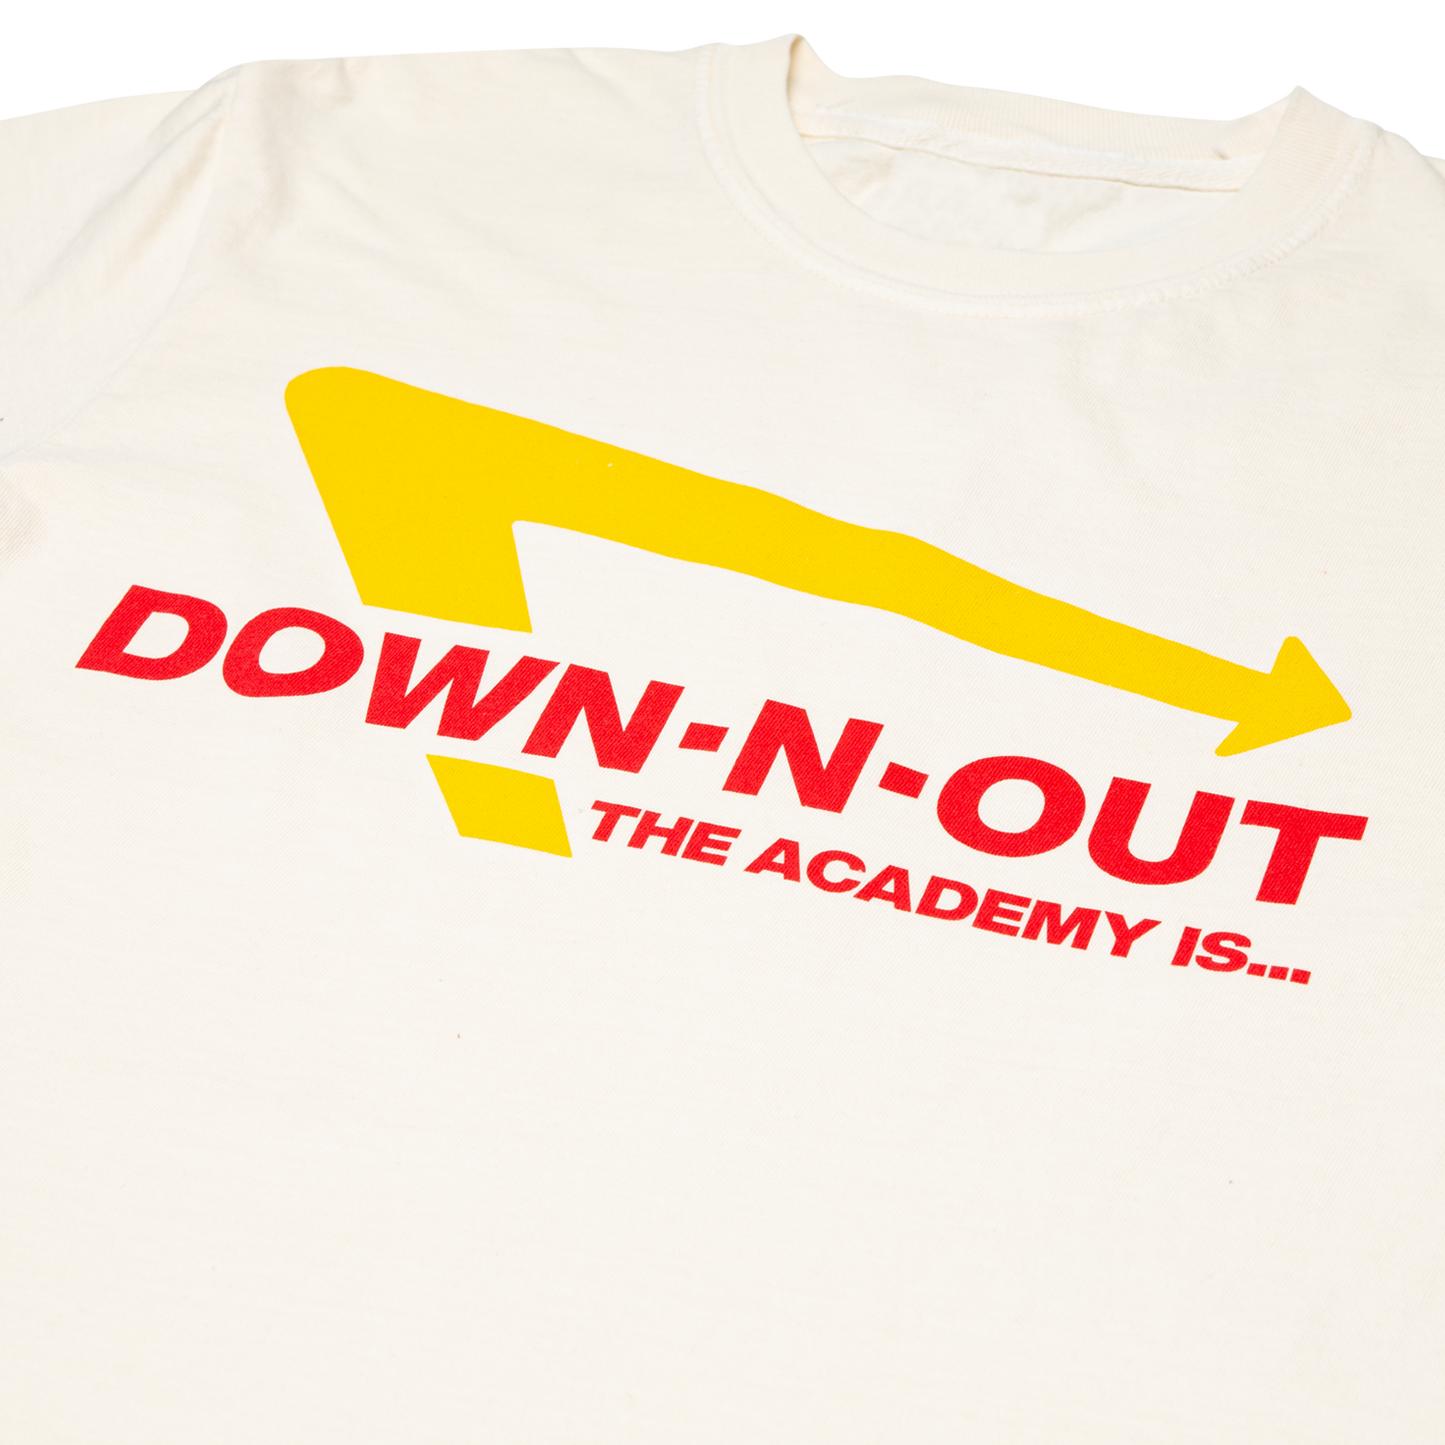 DOWN-N-OUT TEE